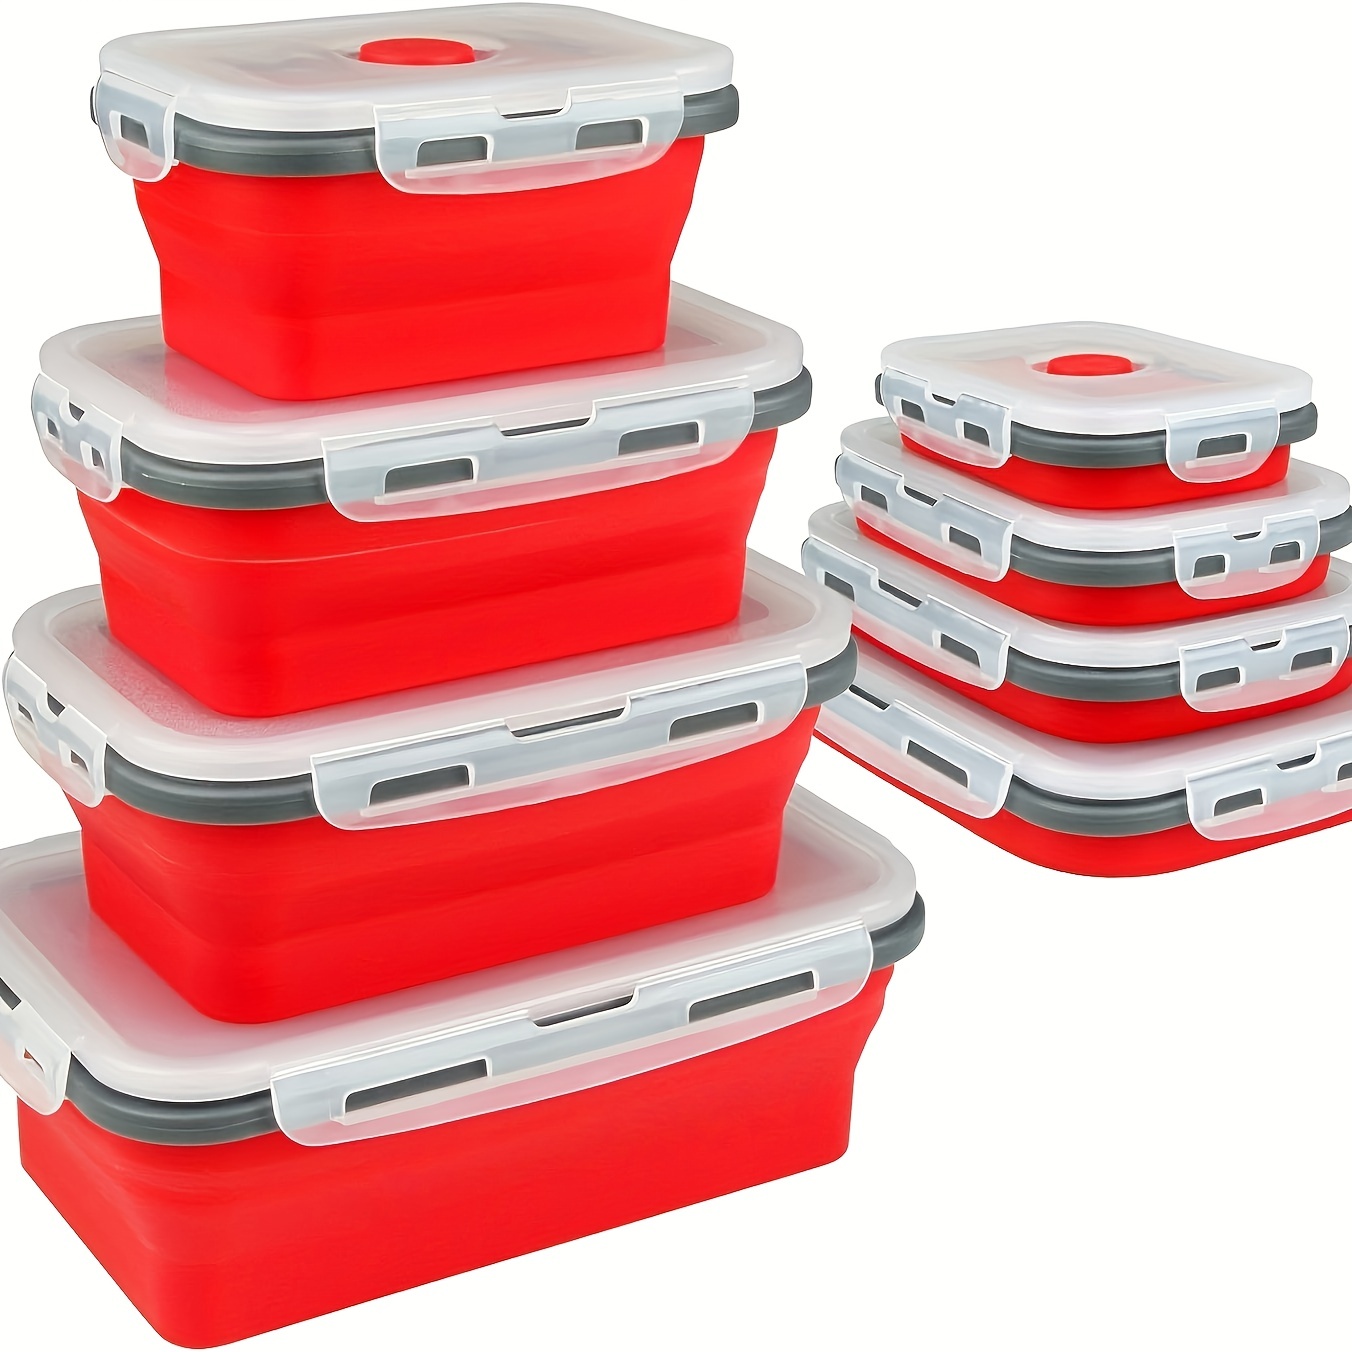 8 Pack Collapsible Food Storage Containers With Lids, Collapsible Storage  Containers Sets Silicone Collapsible Bowls For Camping, RV Accessories